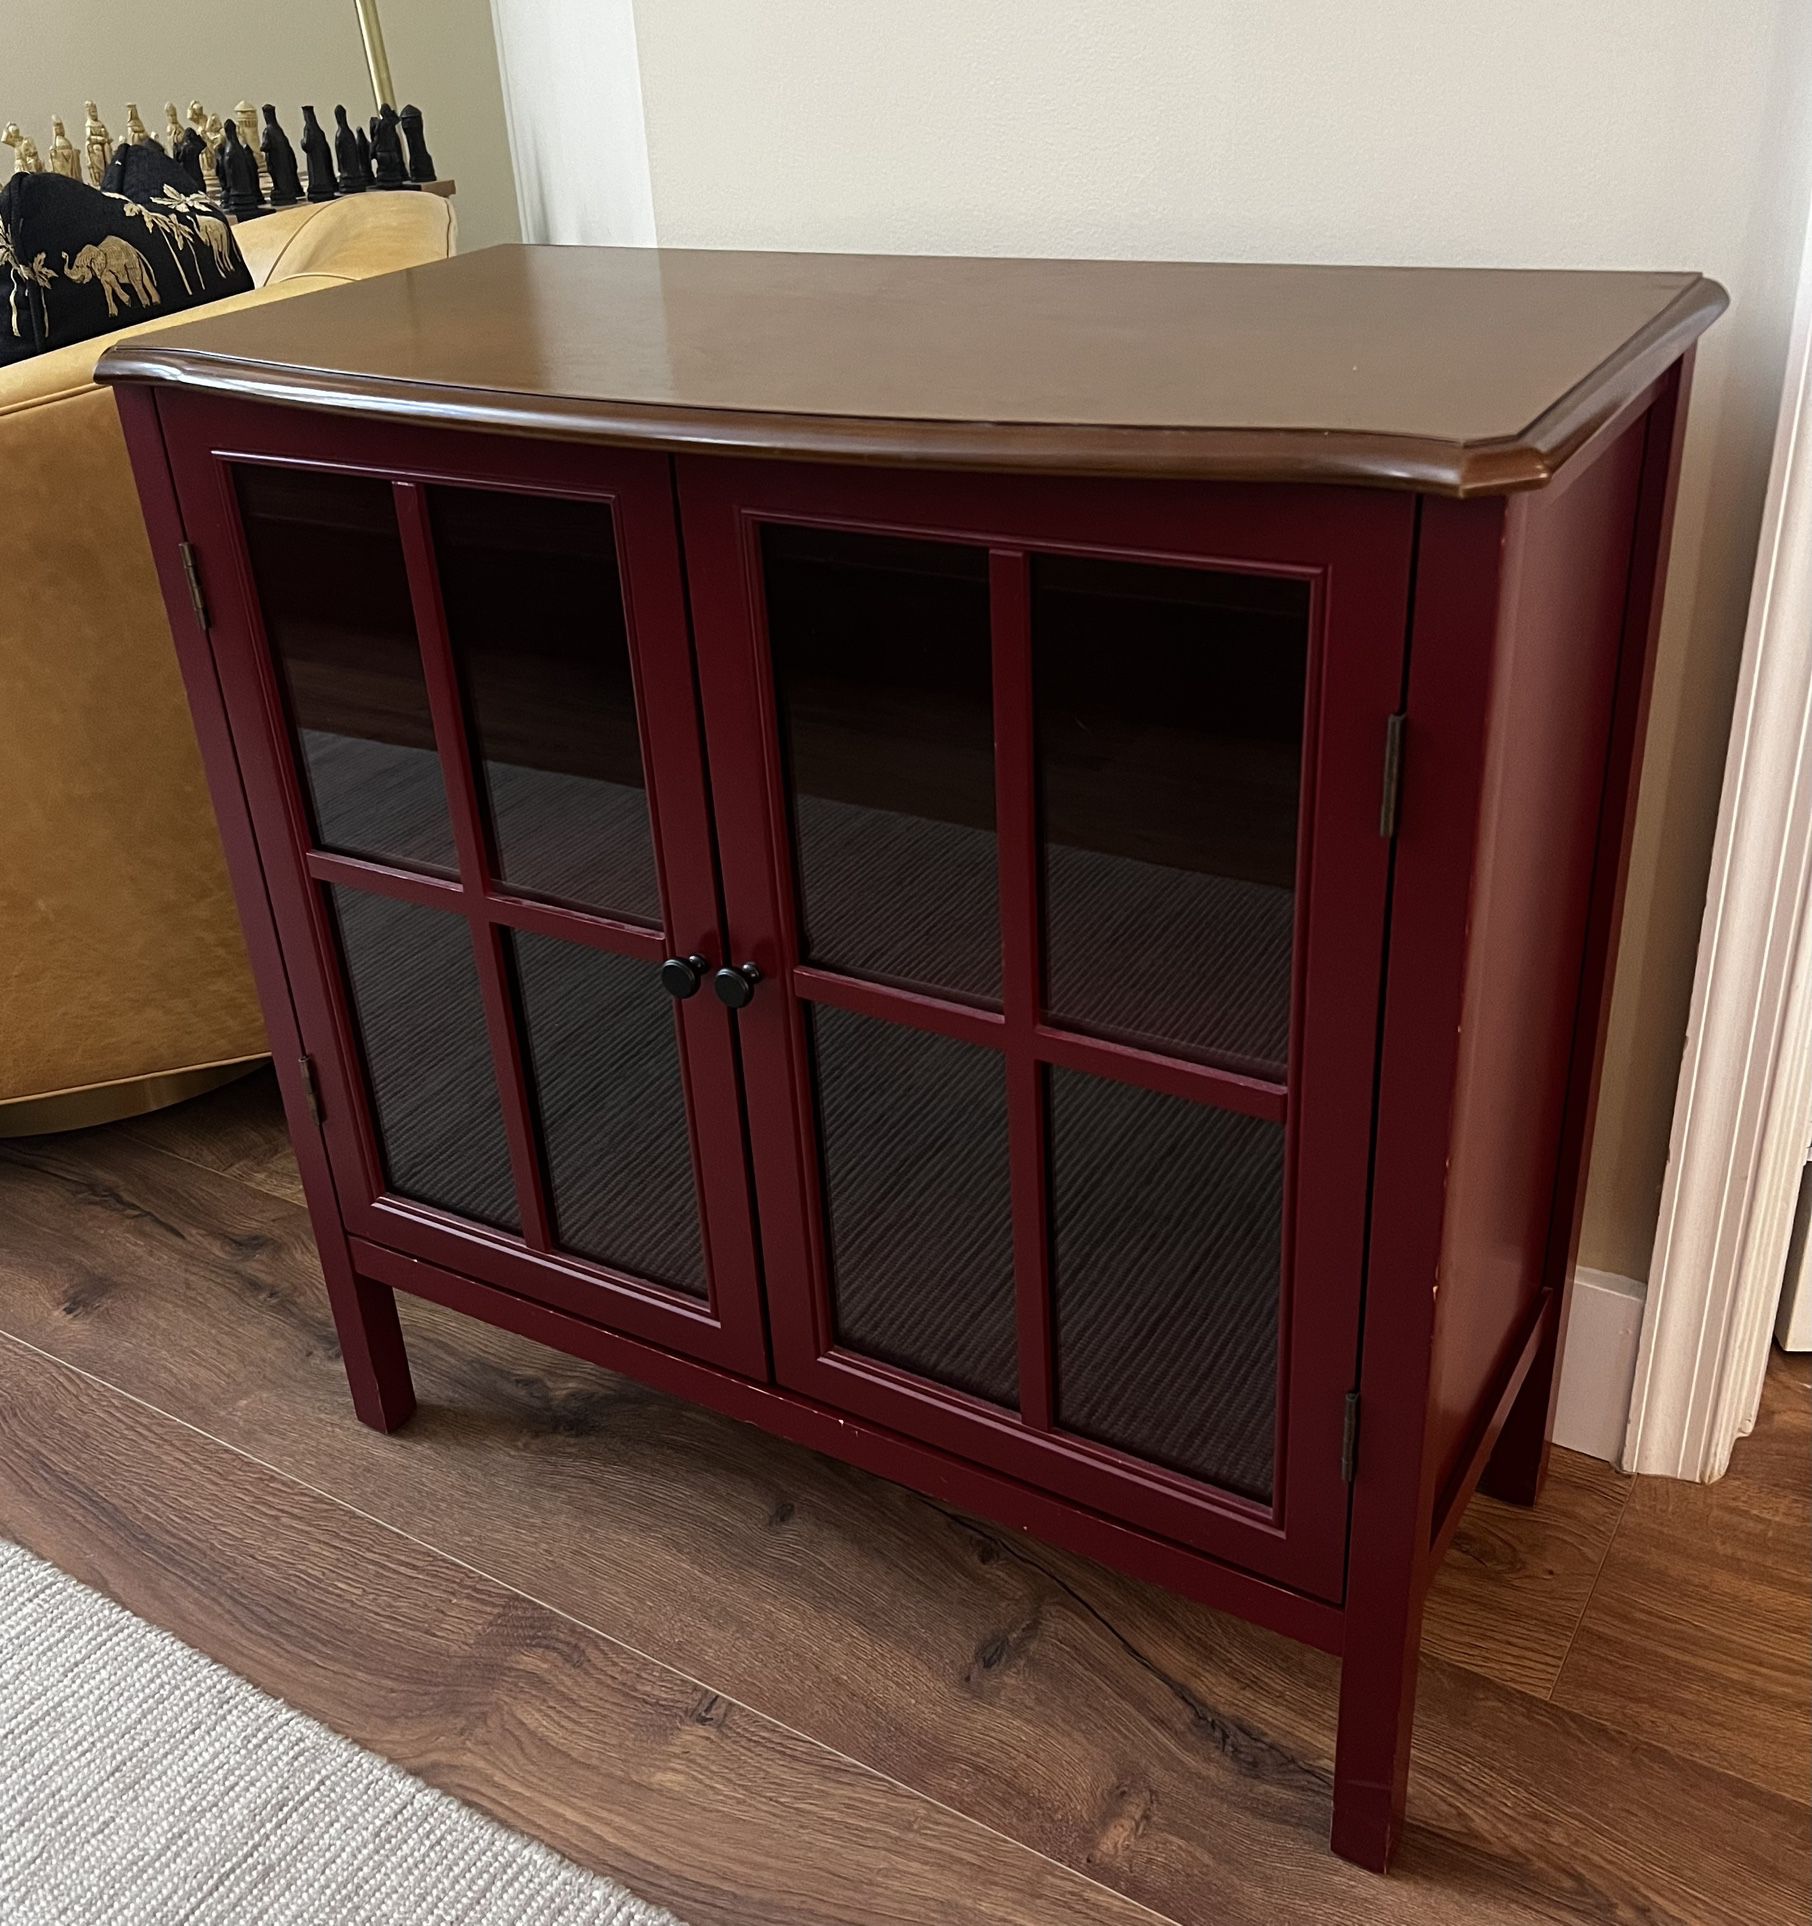 Small Storage Cabinet w/ Shelves & Glass Doors